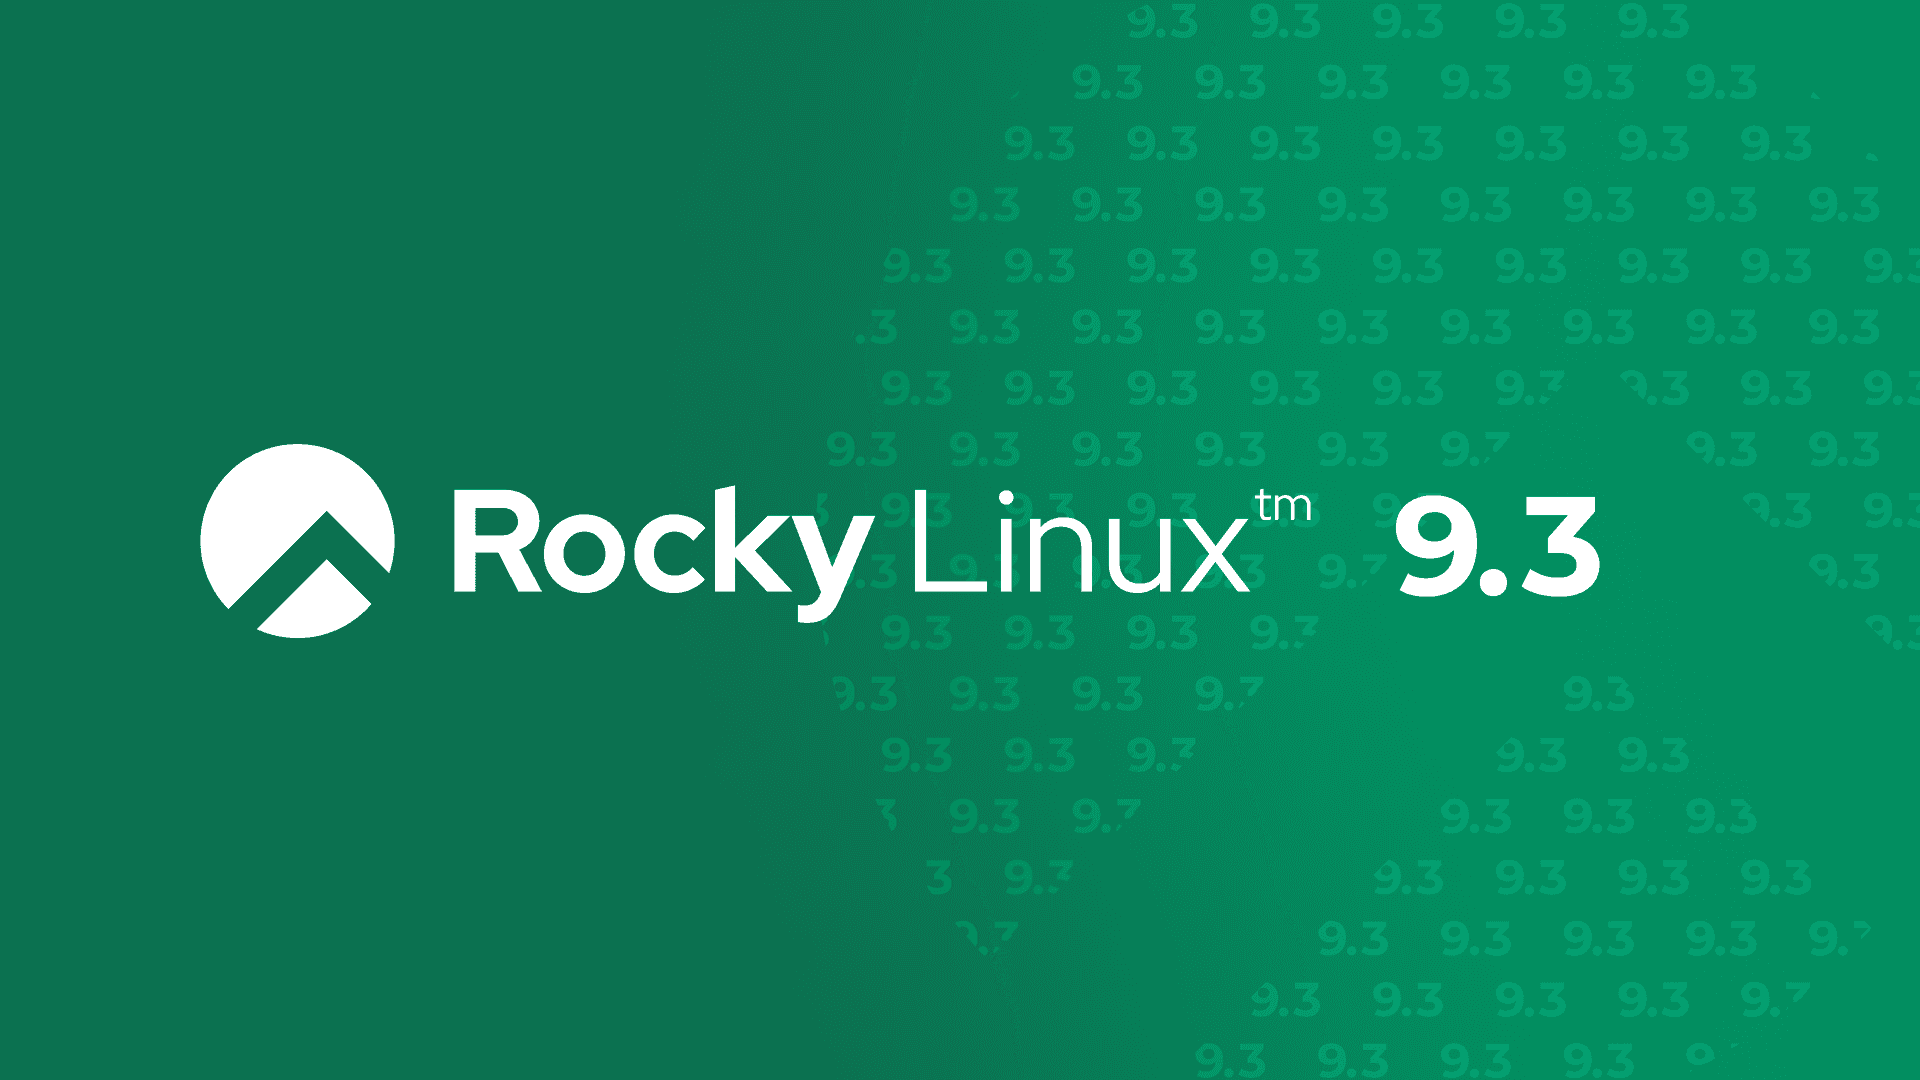 Rocky Linux 9.3 Has Been Released